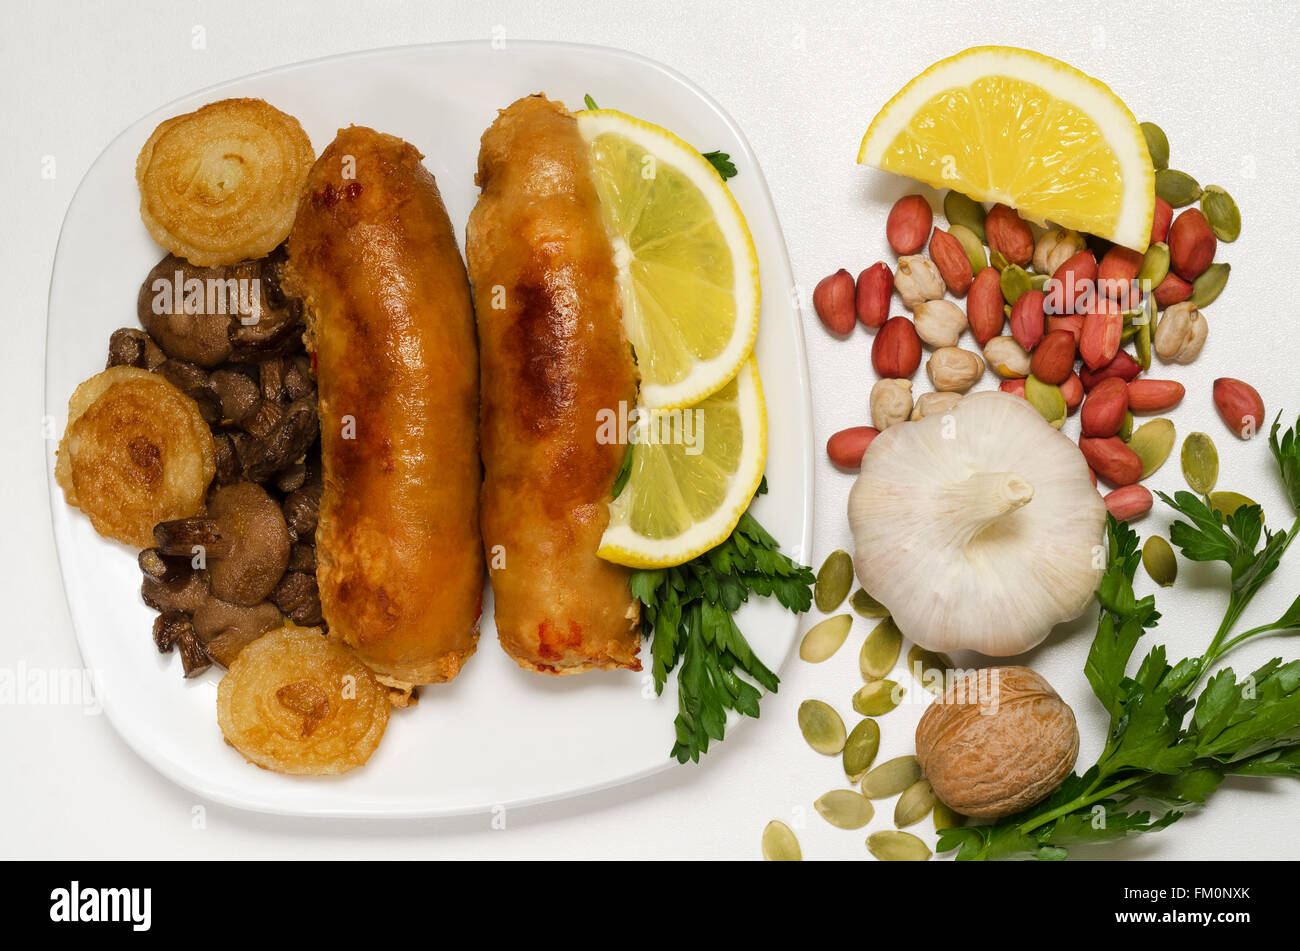 Fried sausage with mushrooms and onions on a white plate. Stock Photo